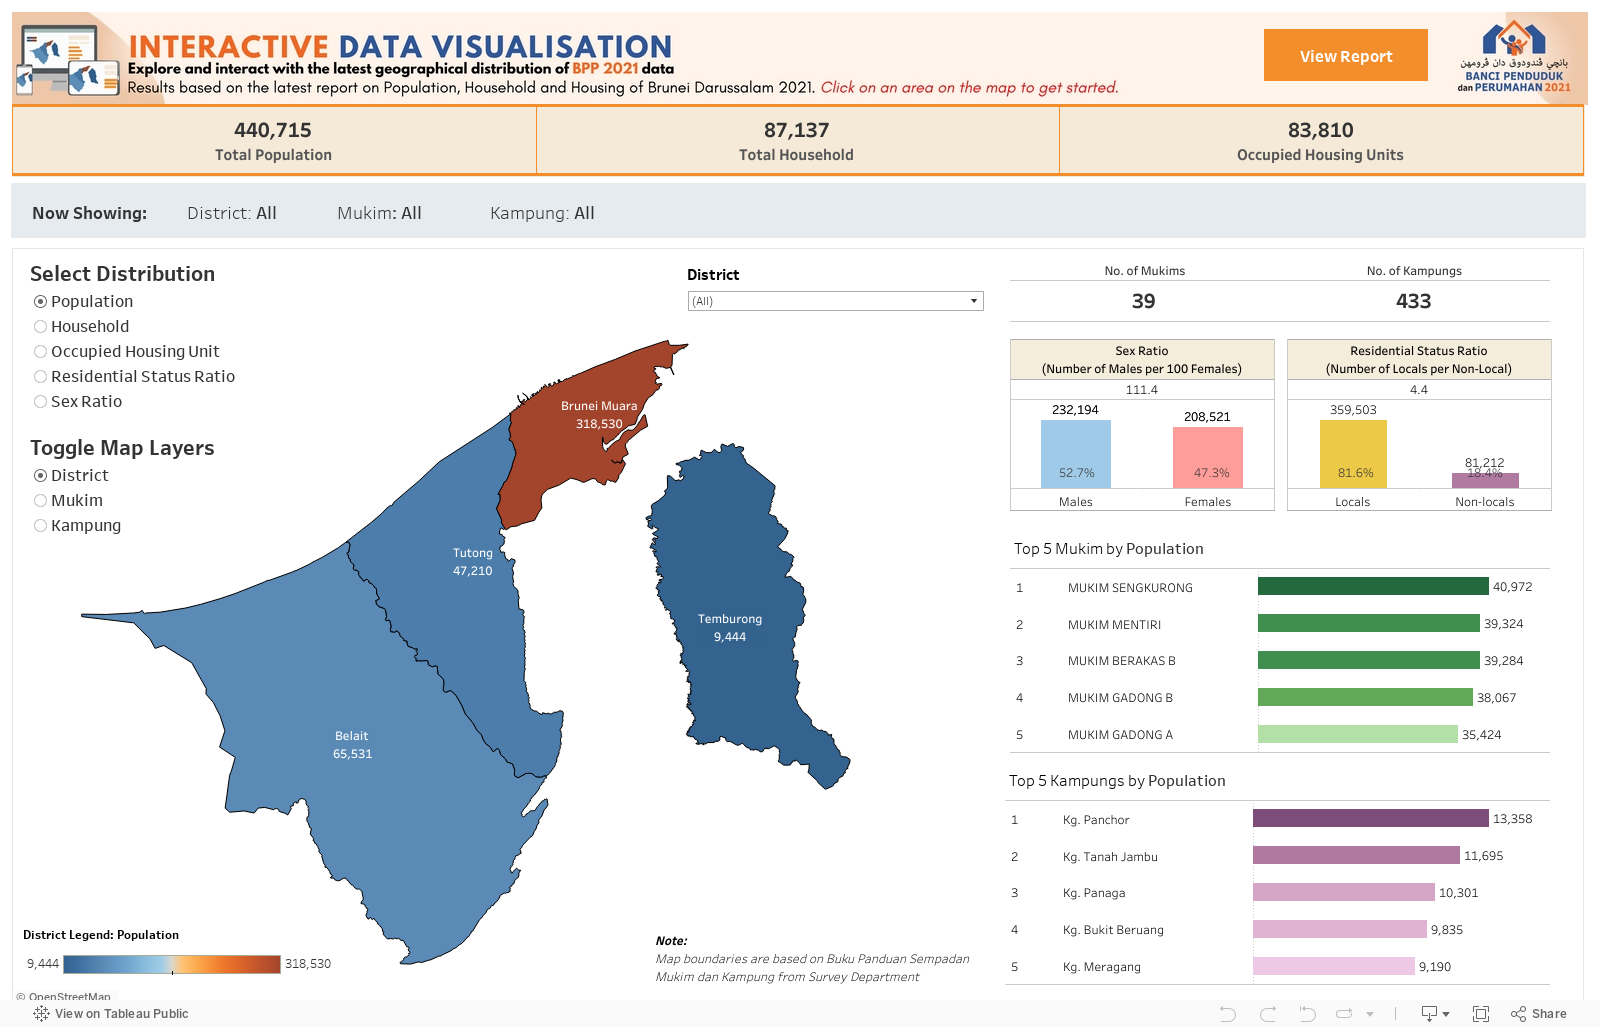 Geographic DistributionResults based on the latest report on Population, Household and Housing of Brunei Darussalam 2021. Click on an area on the map to get started. 